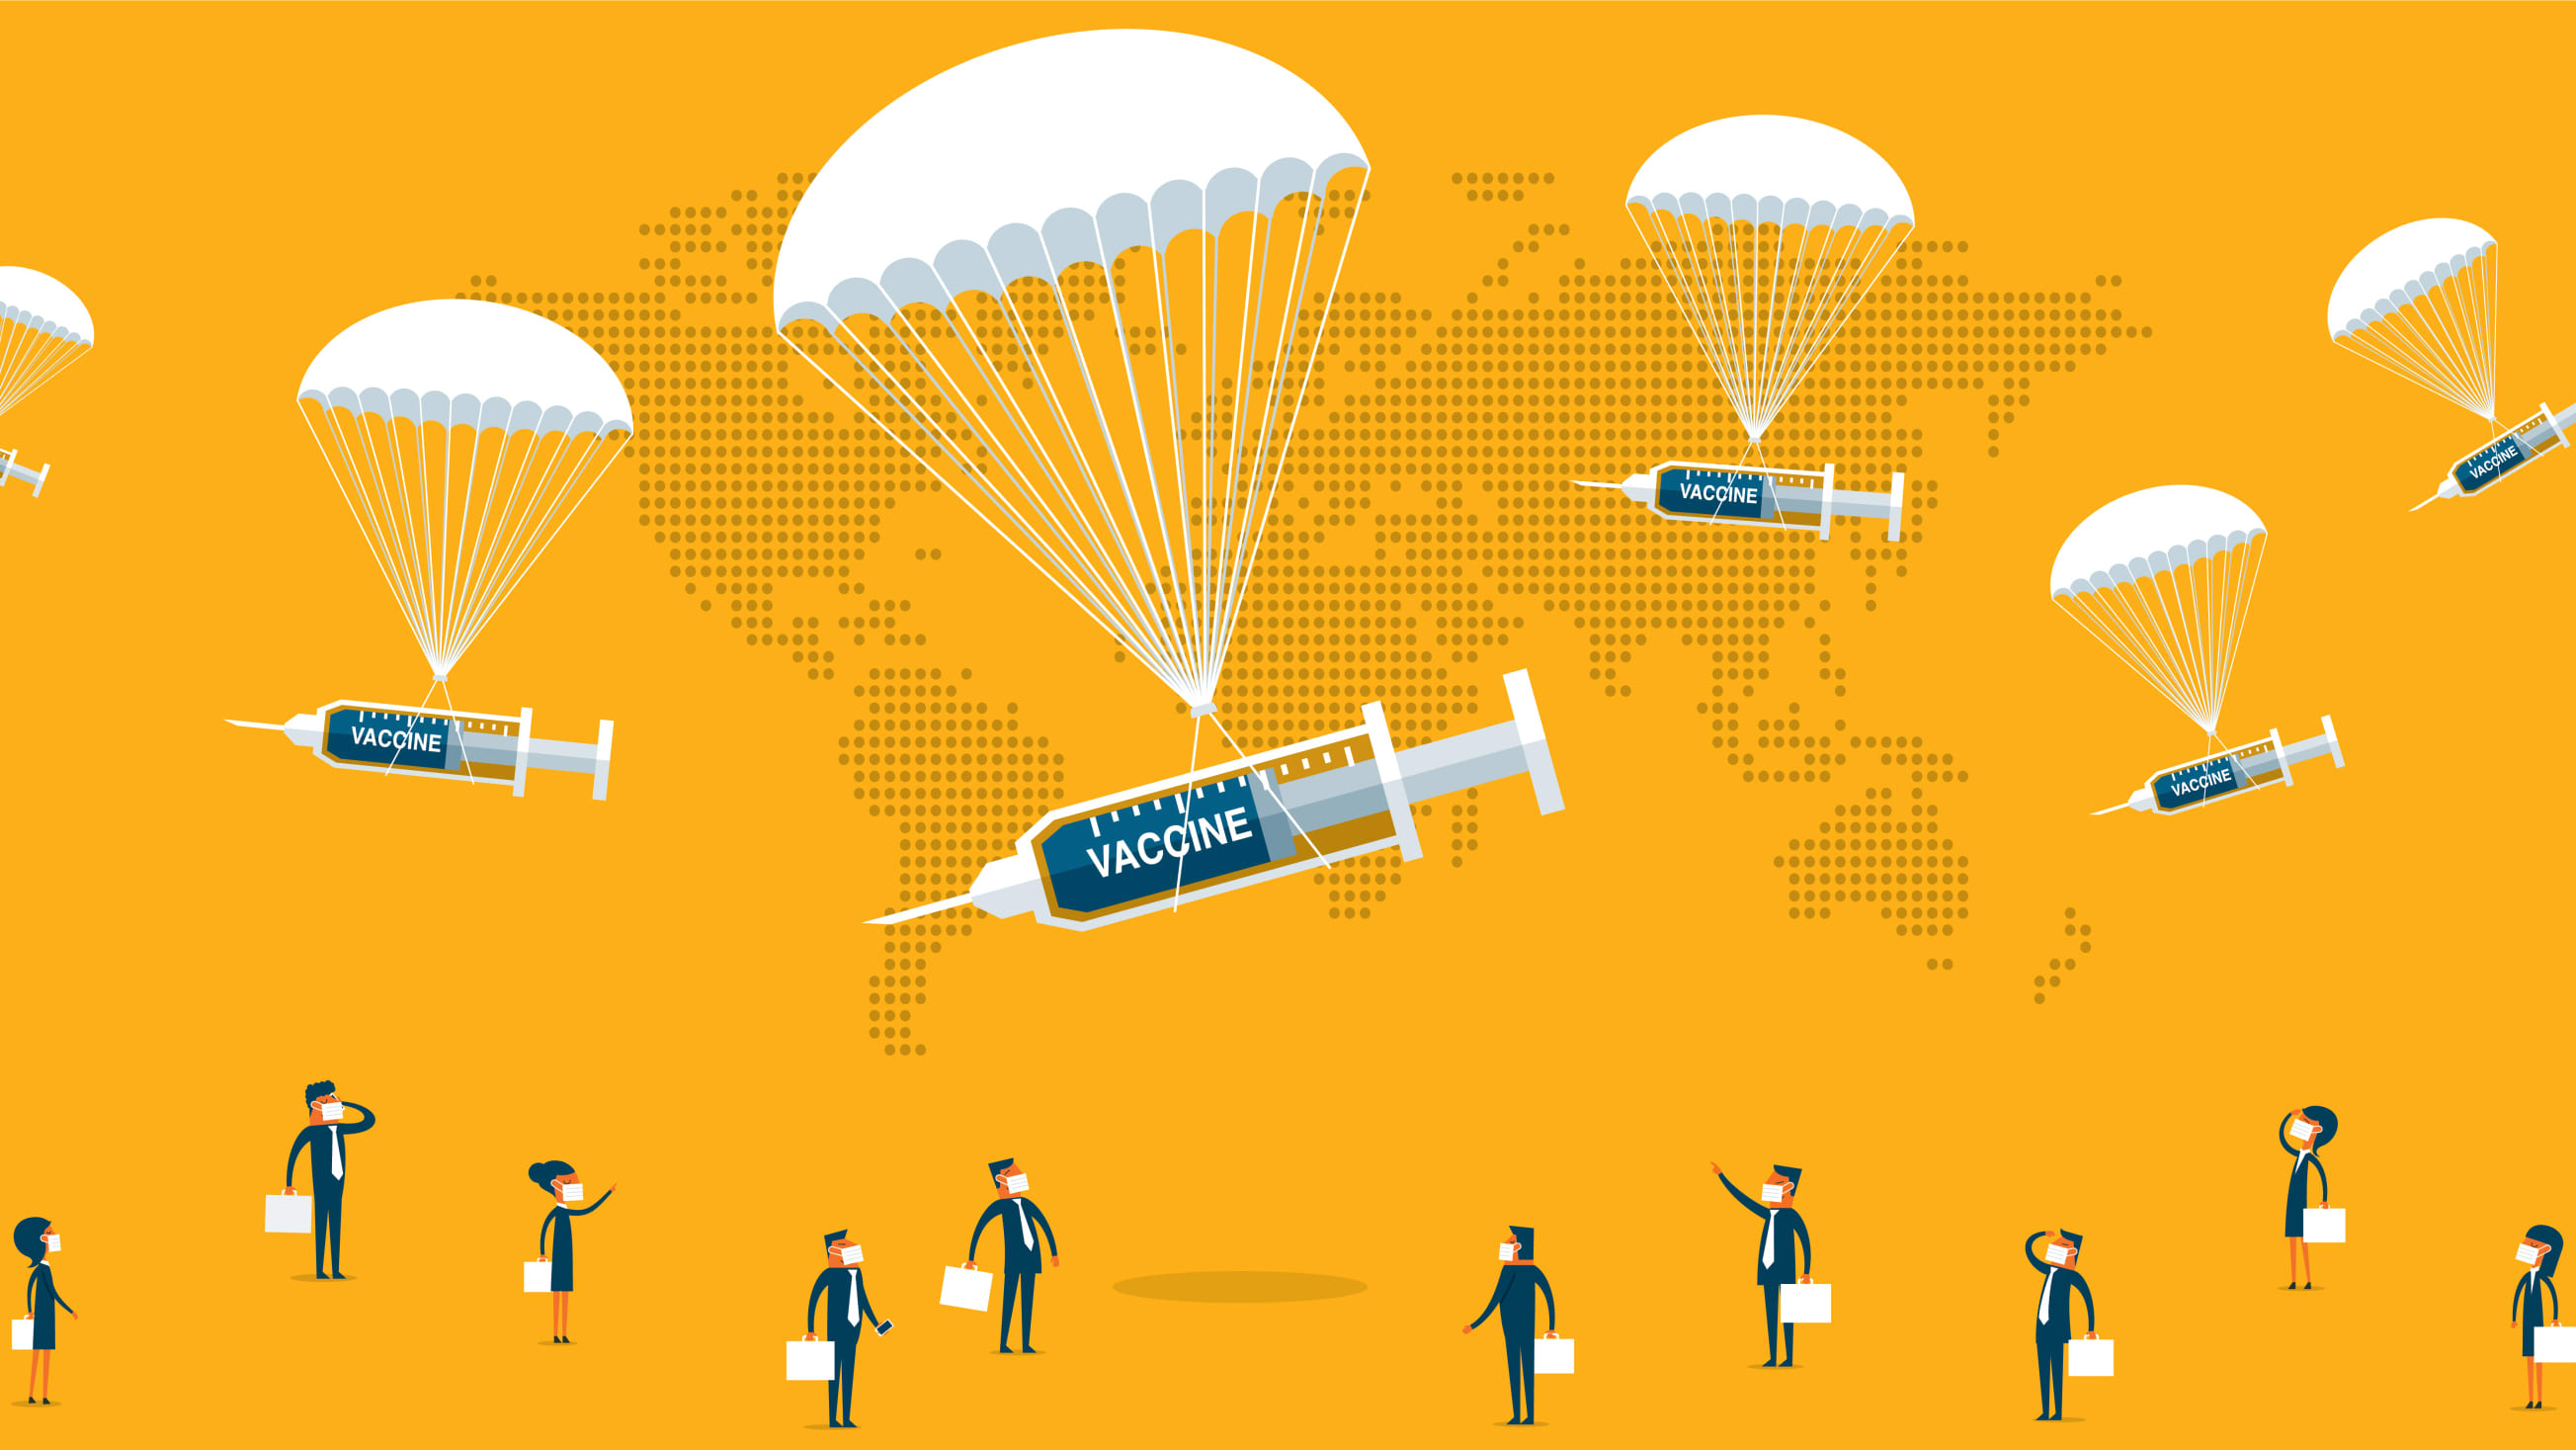 an illustration image of parachuting covid-19 vaccines dropping from the sky to recipients below